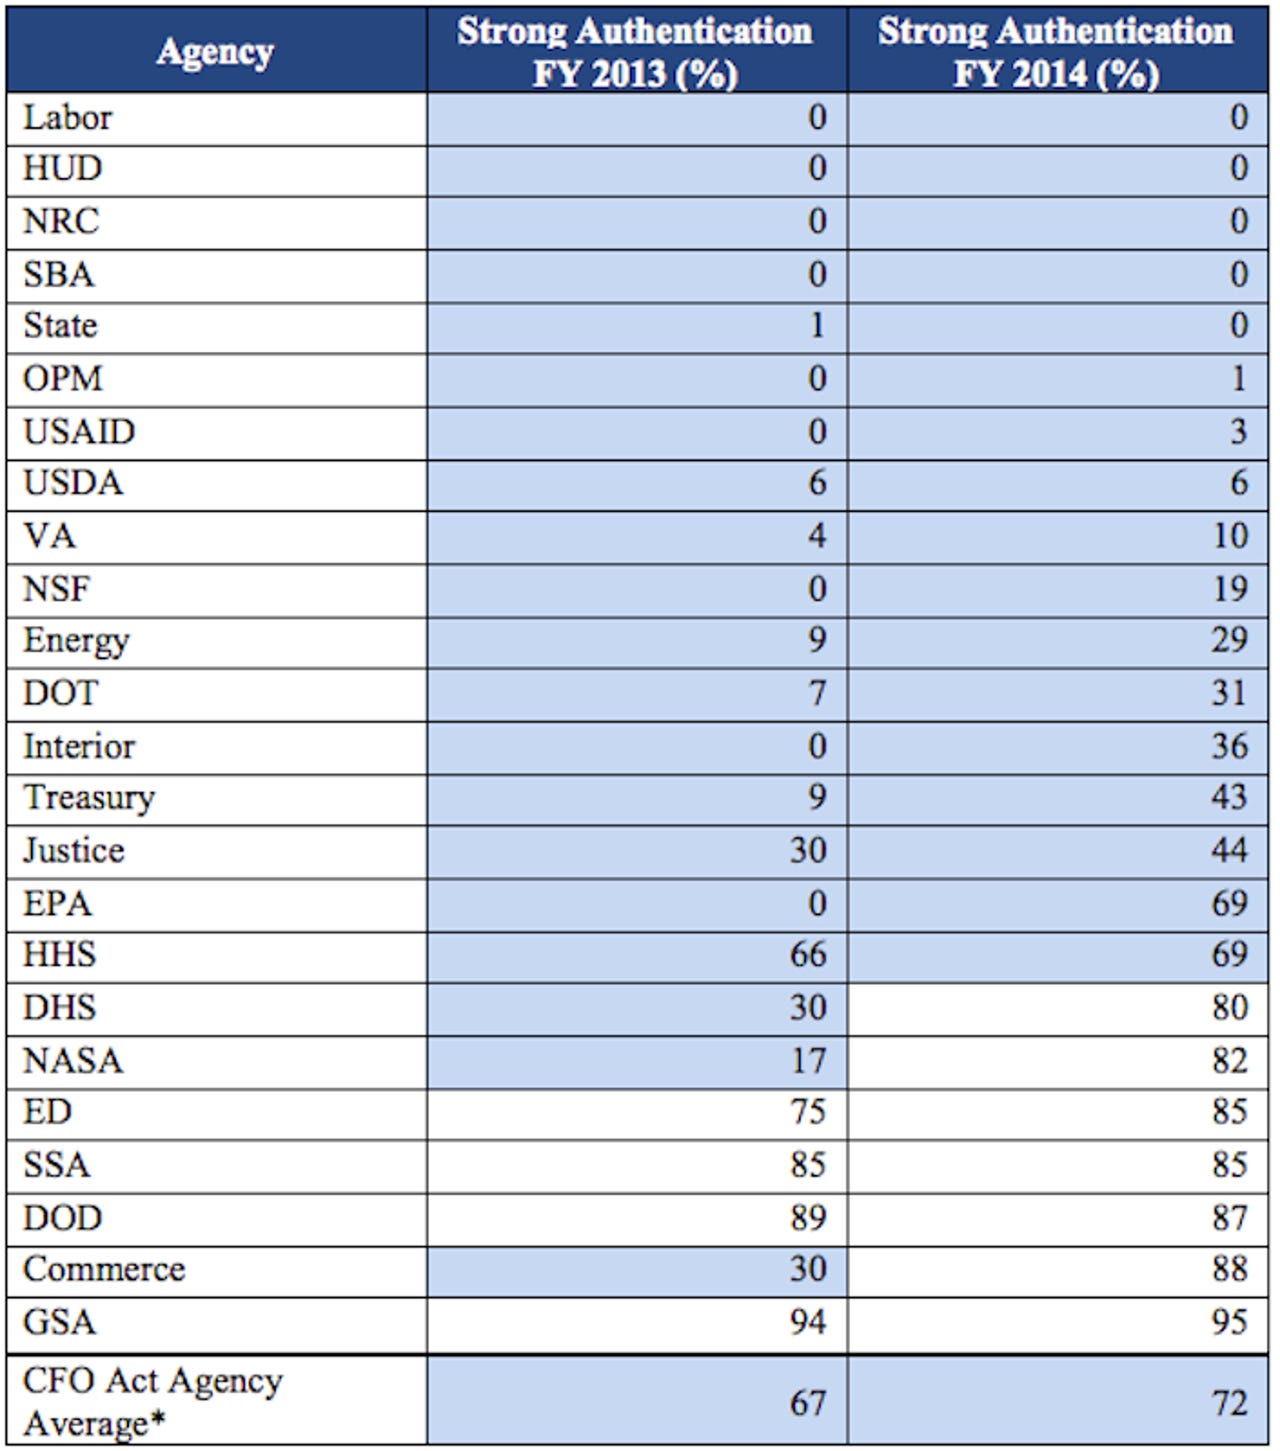 strong-authn-capabilities-fed-gov-agencies-2013-14.png